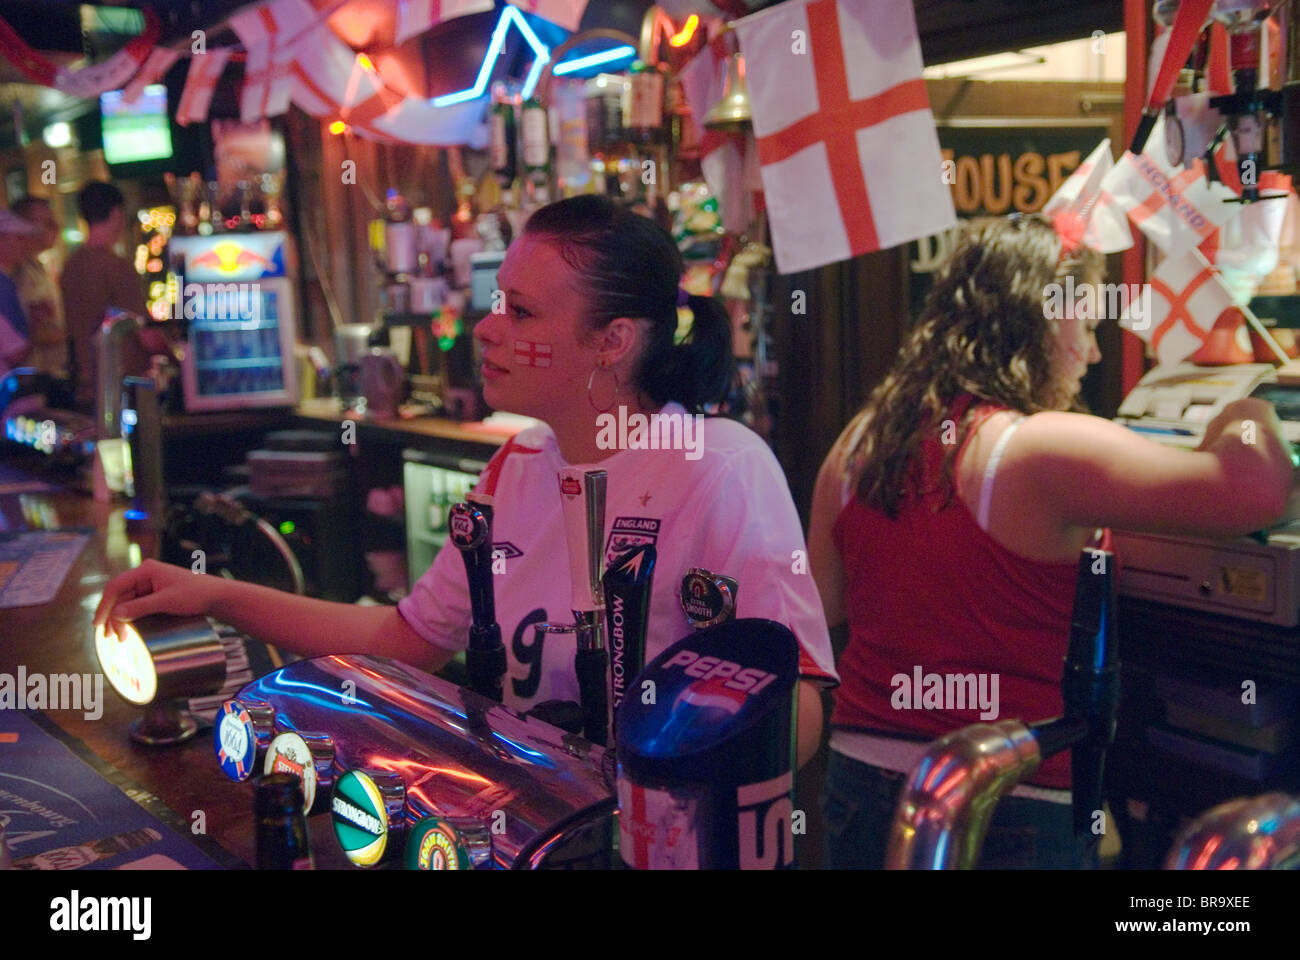 Pub interior women pulling pints of beer, interior decorated with English union jack flags celebrating World Cup football match 2006 2000s HOMER SYKES Stock Photo